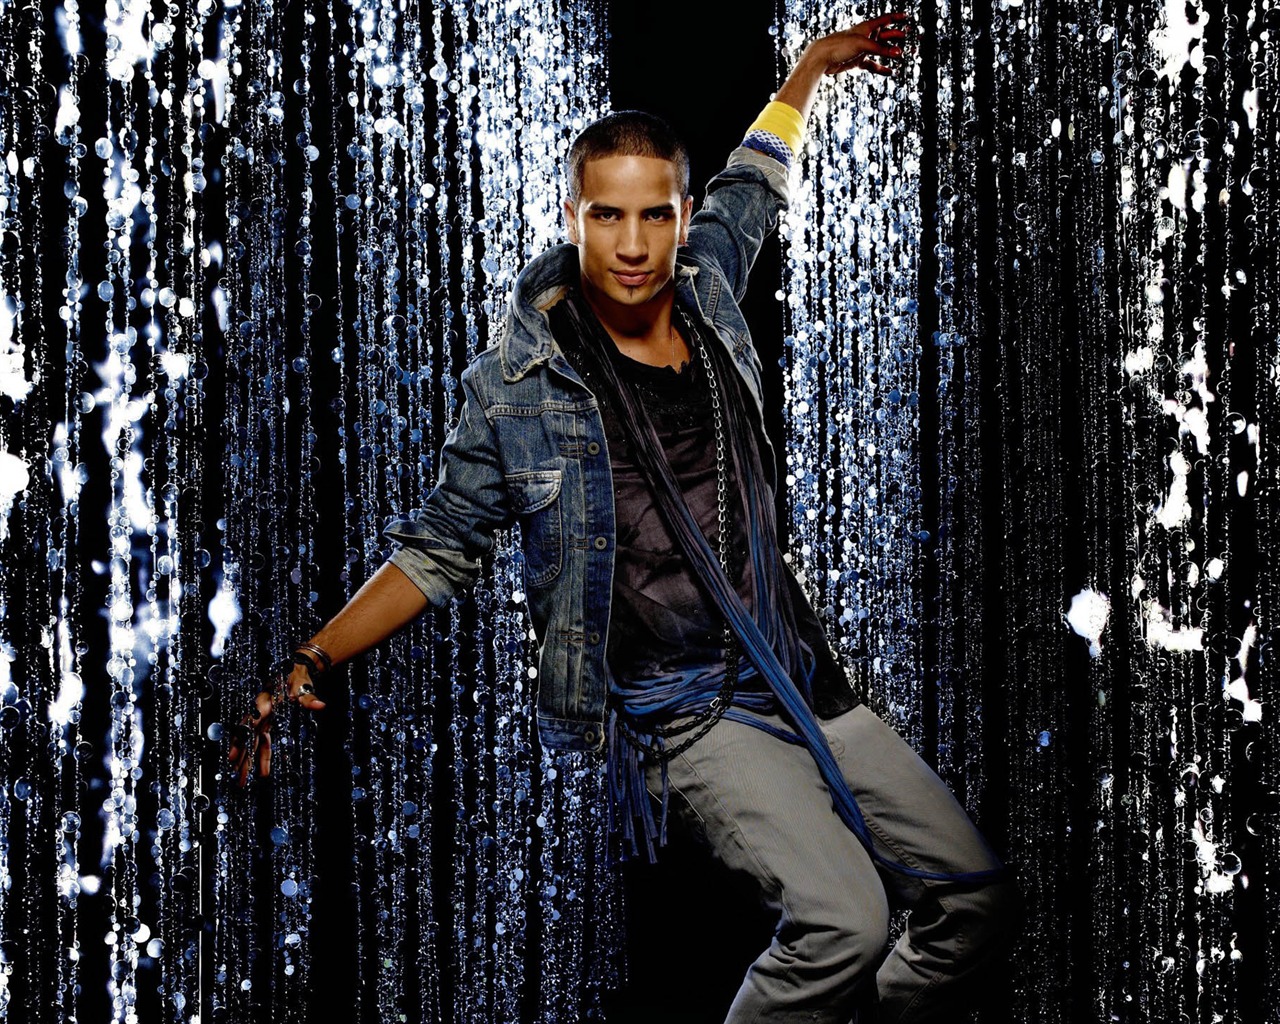 So You Think You Can Dance Wallpaper (3) #14 - 1280x1024